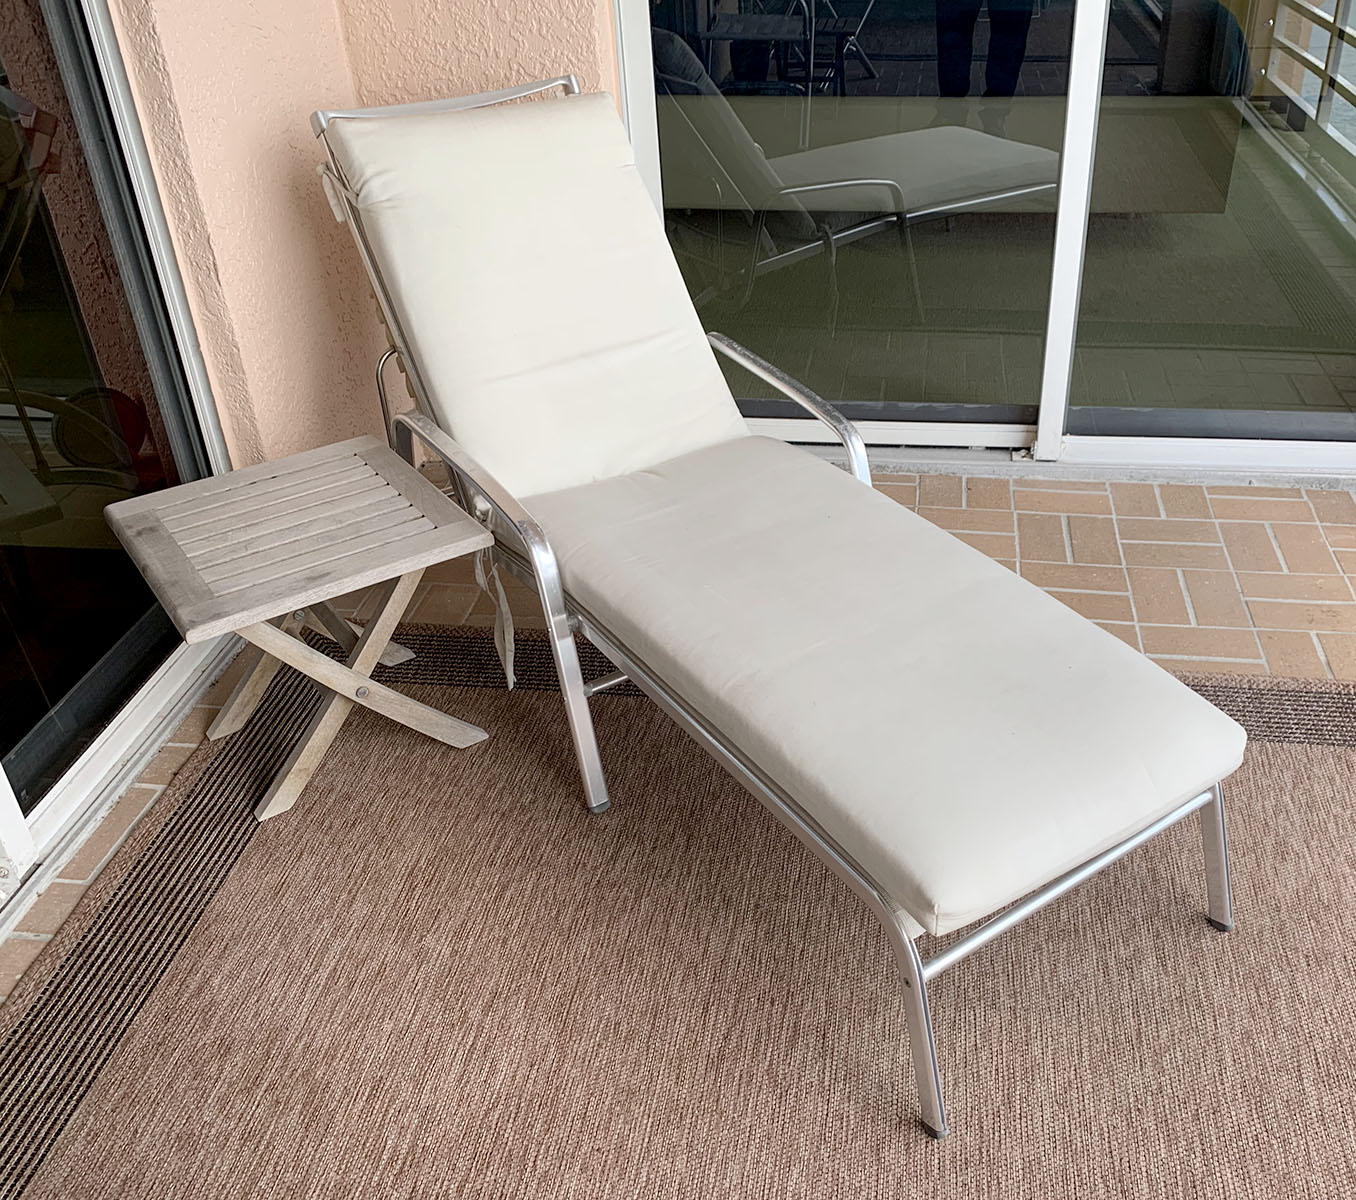 EBEL LUCCA ALUMINUM CHAISE LOUNGE: